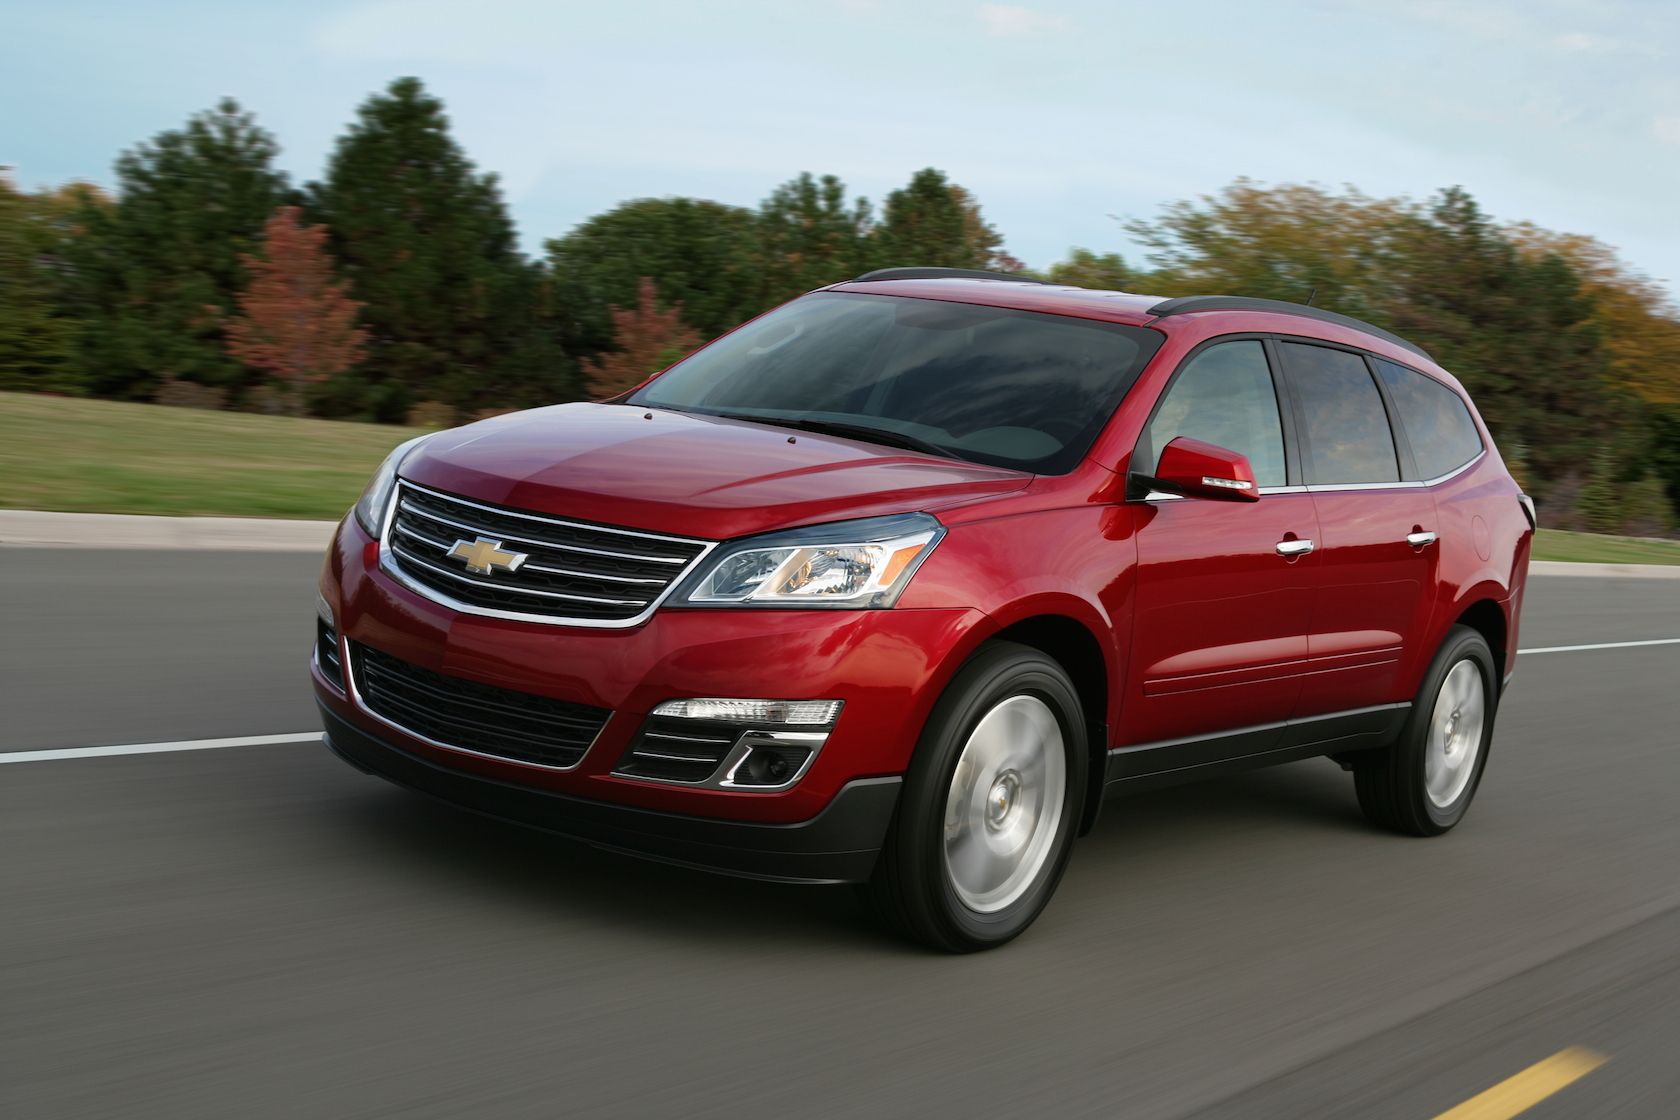 2015 Chevrolet Traverse in motion on road driving past greenery